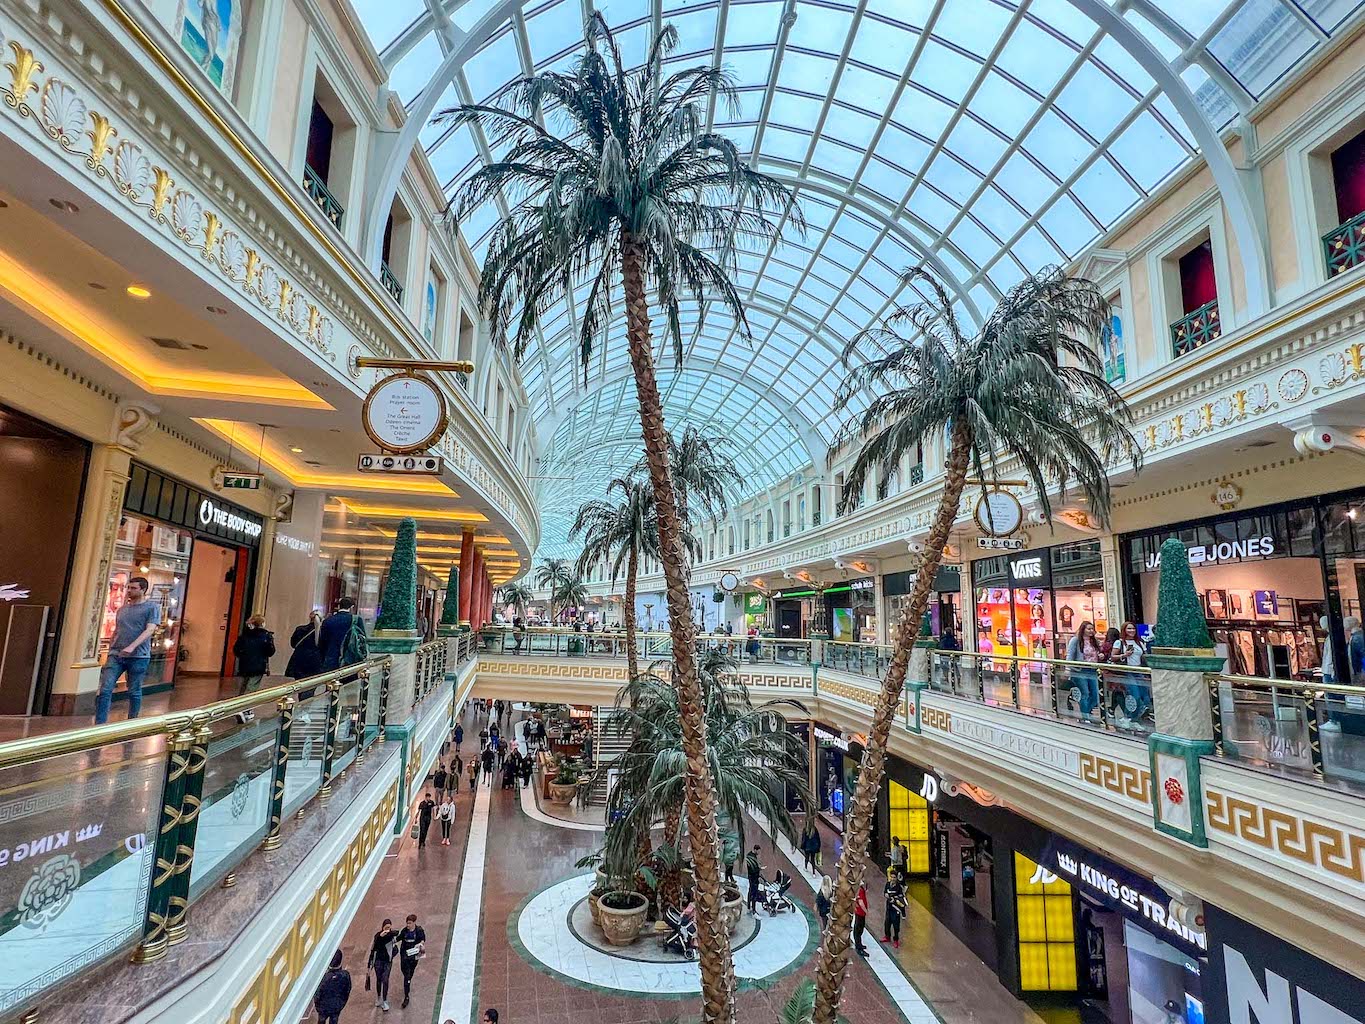 Inside The Trafford Centre Shopping Centre, one day in Manchester